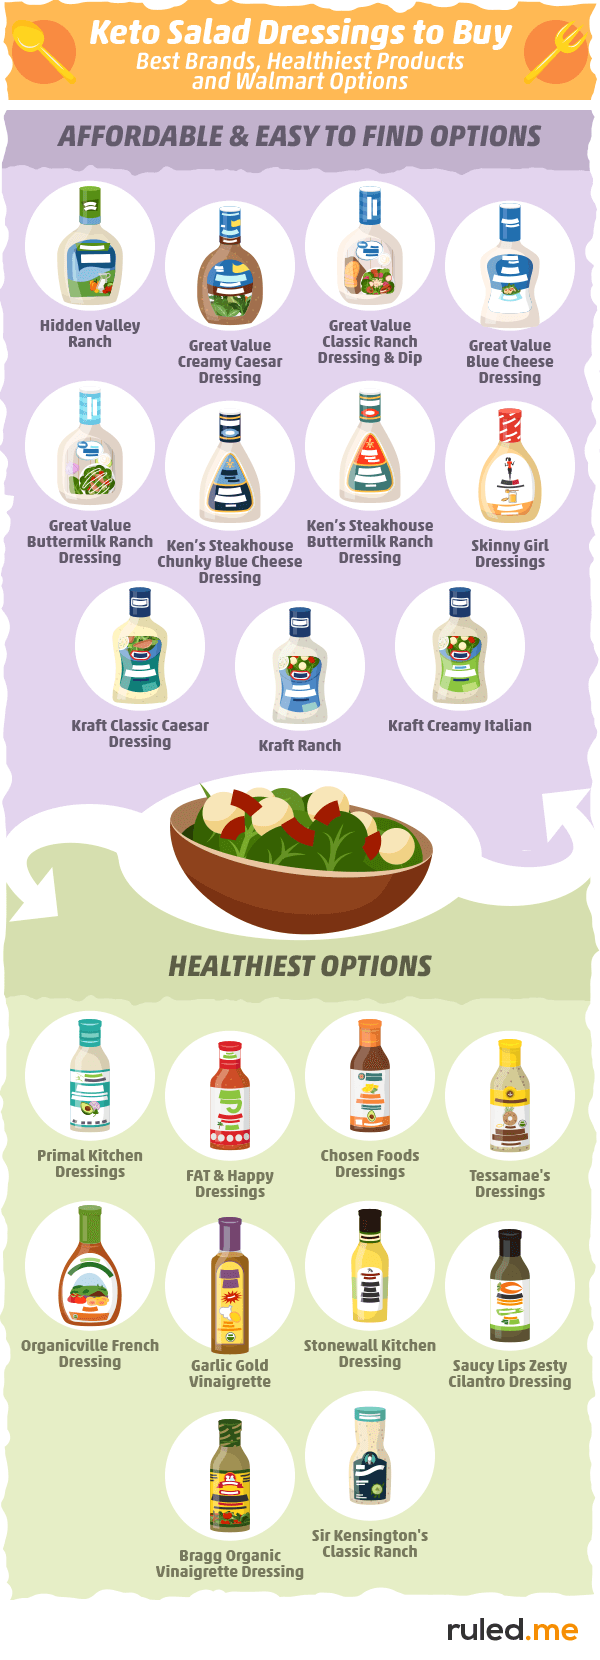 Keto Salad Dressings to Buy: Best Brands, Healthiest Products, and Walmart Options